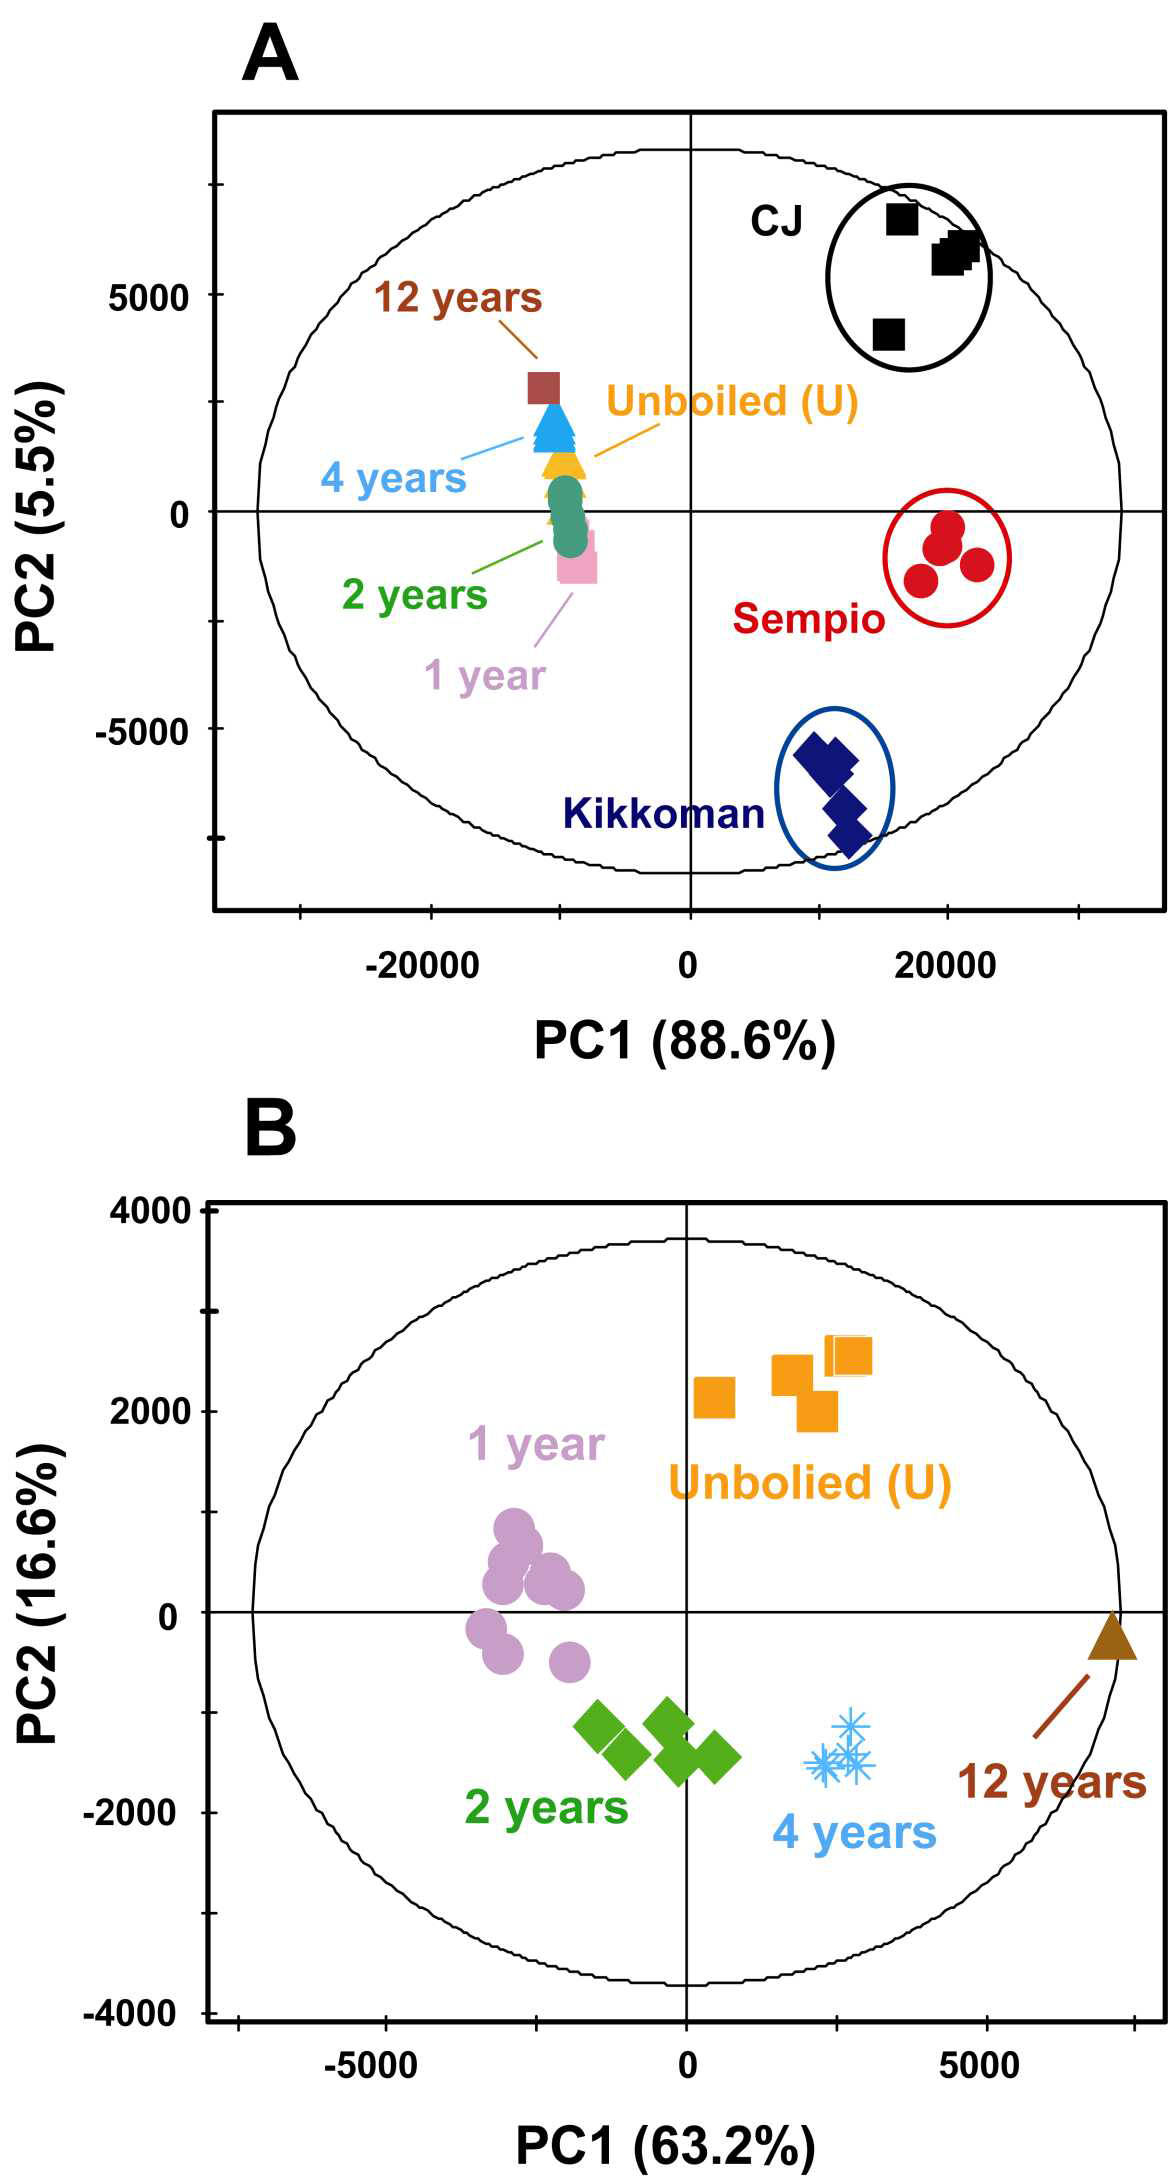 PCA scores plots derived from the 600 MHz 1H NMR spectra of traditional Korean and commercial Korean and Japanese soy sauces (A). Unboiled (U), 1, 2, 4 and 12 years represent traditional Korean soy sauces; unboiled soy sauces (U) were aged for 1 year without boiling process whereas 1, 2, 4 and 12 years soy sauces were boiled for 30 minutes prior to aging. CJ, Sempio and Kikkoman represent commercially available soy sauces. PCA score plot in panel B was re-generated only with traditional Korean soy sauces from panel A.